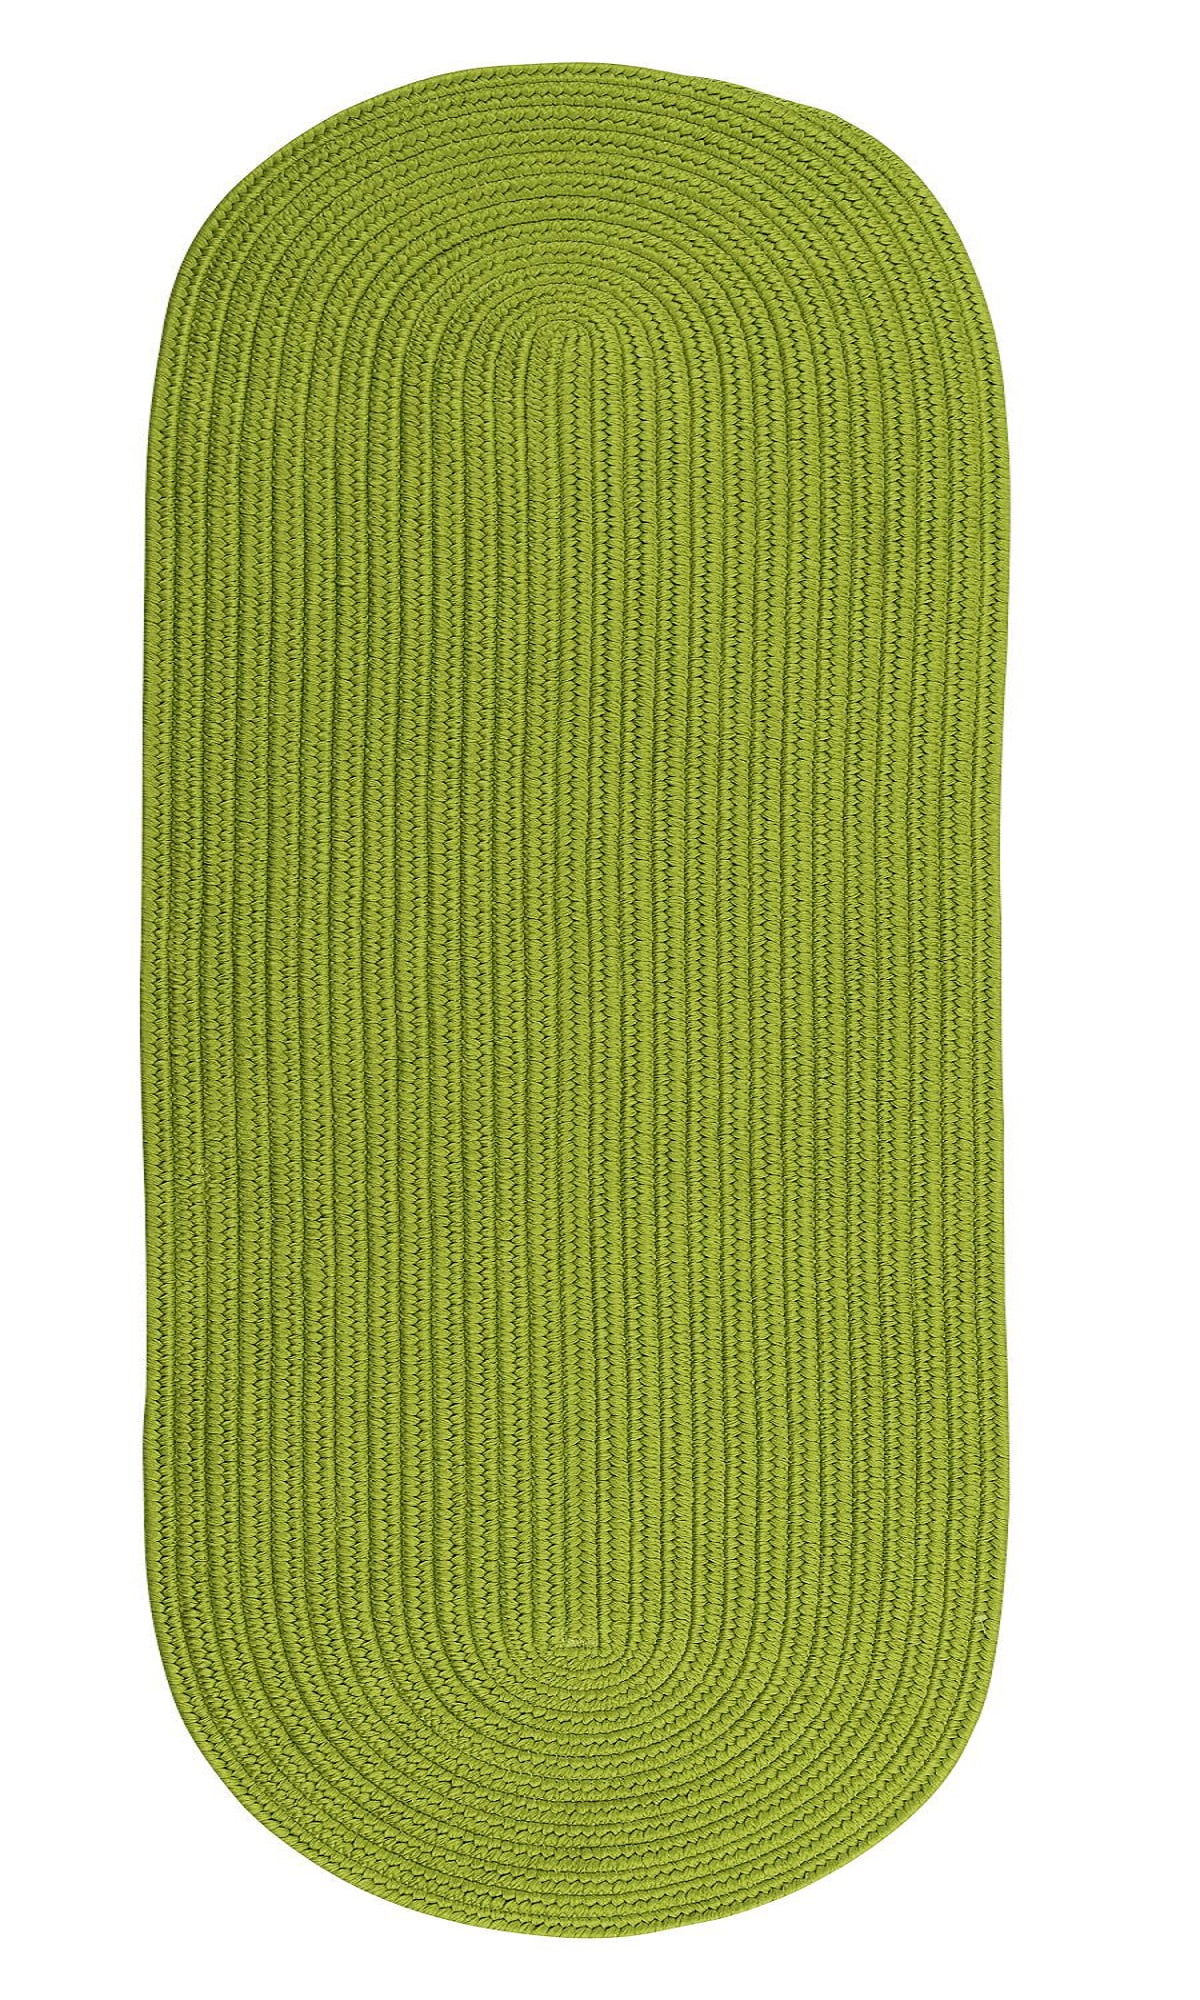 Designs-Done-Right Rug  Reversible Flat-Braid Oval Braided Runner  Lime - 2 ft. 4 in. x 11 ft.